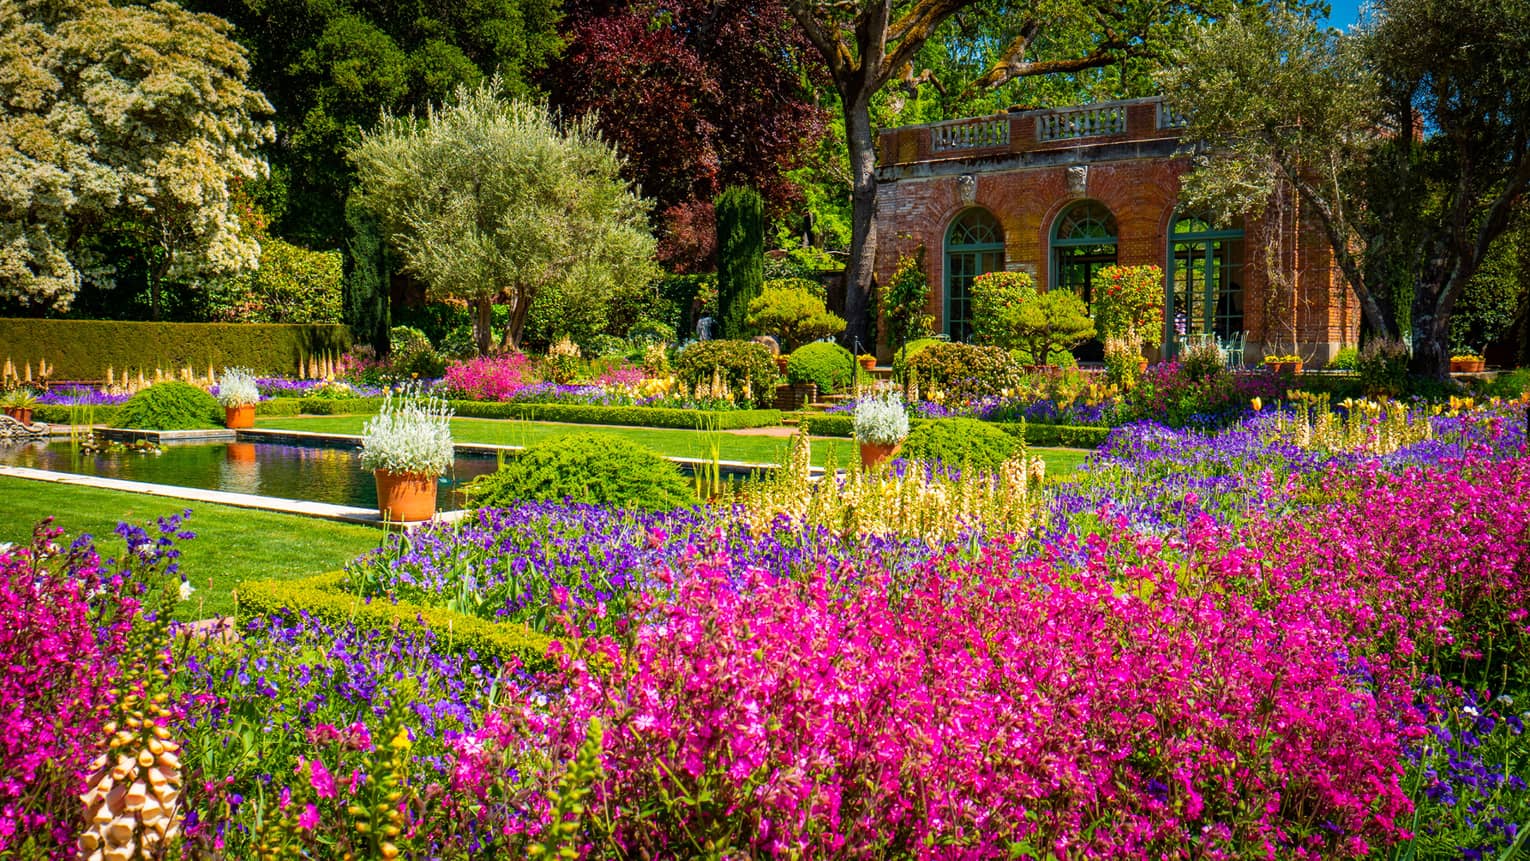 A garden with colourful flowers.